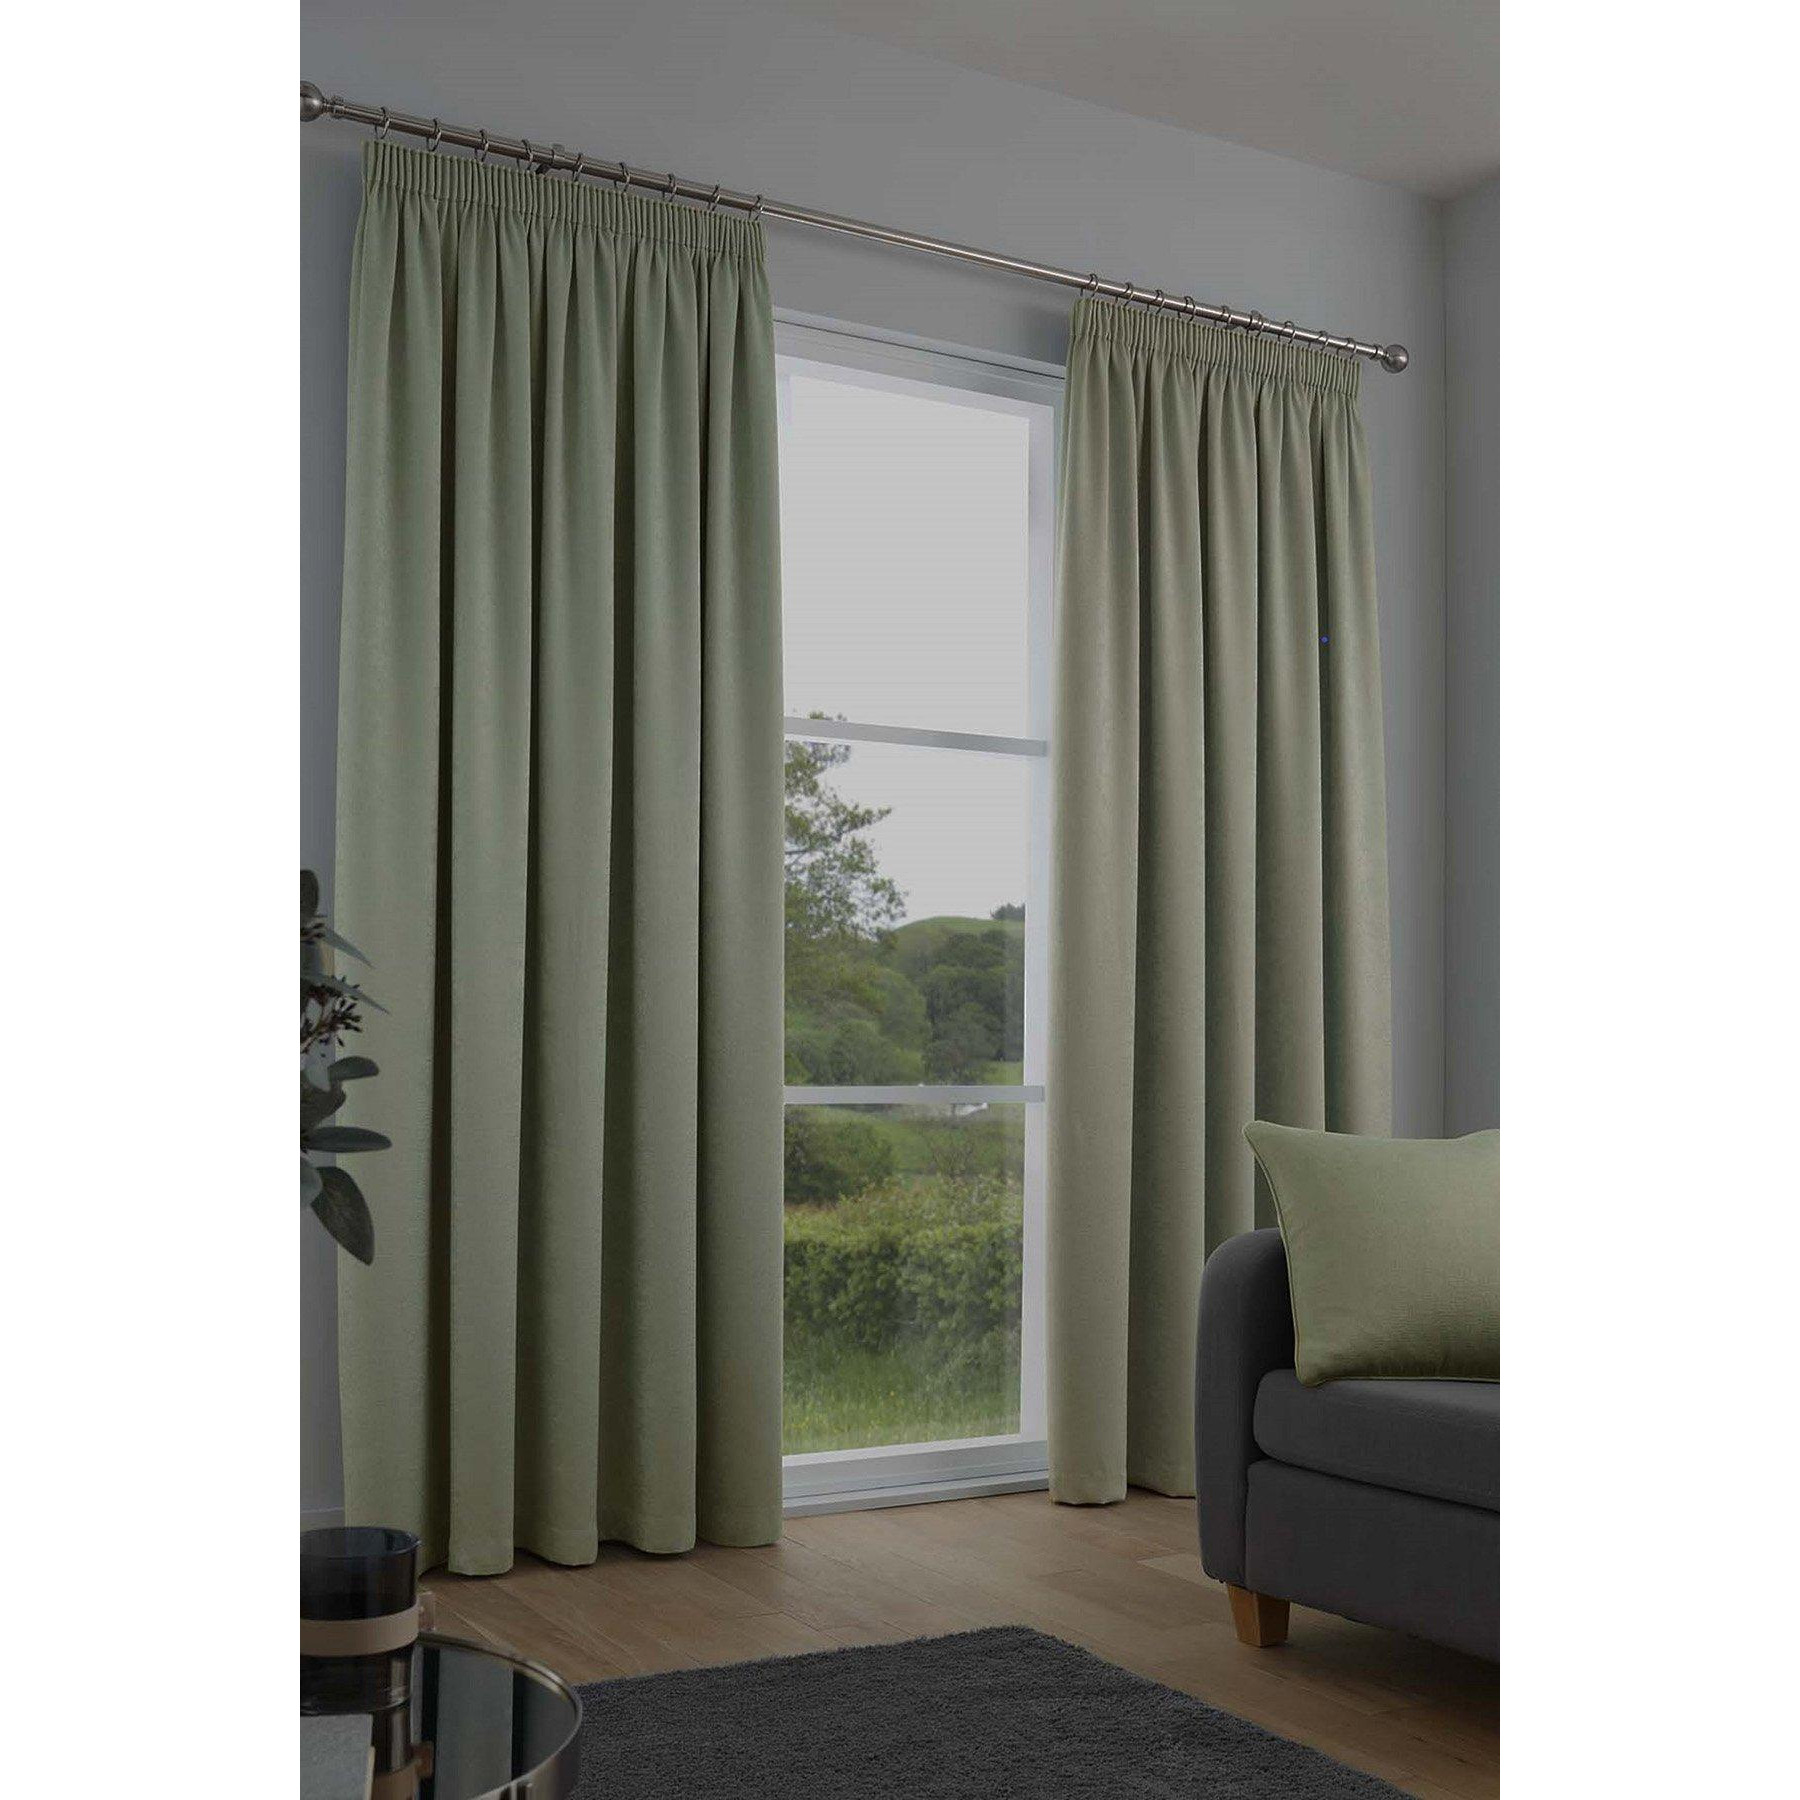 'Galaxy' Pair of Light Reducing Thermal Effect Pencil Pleat Curtains - image 1